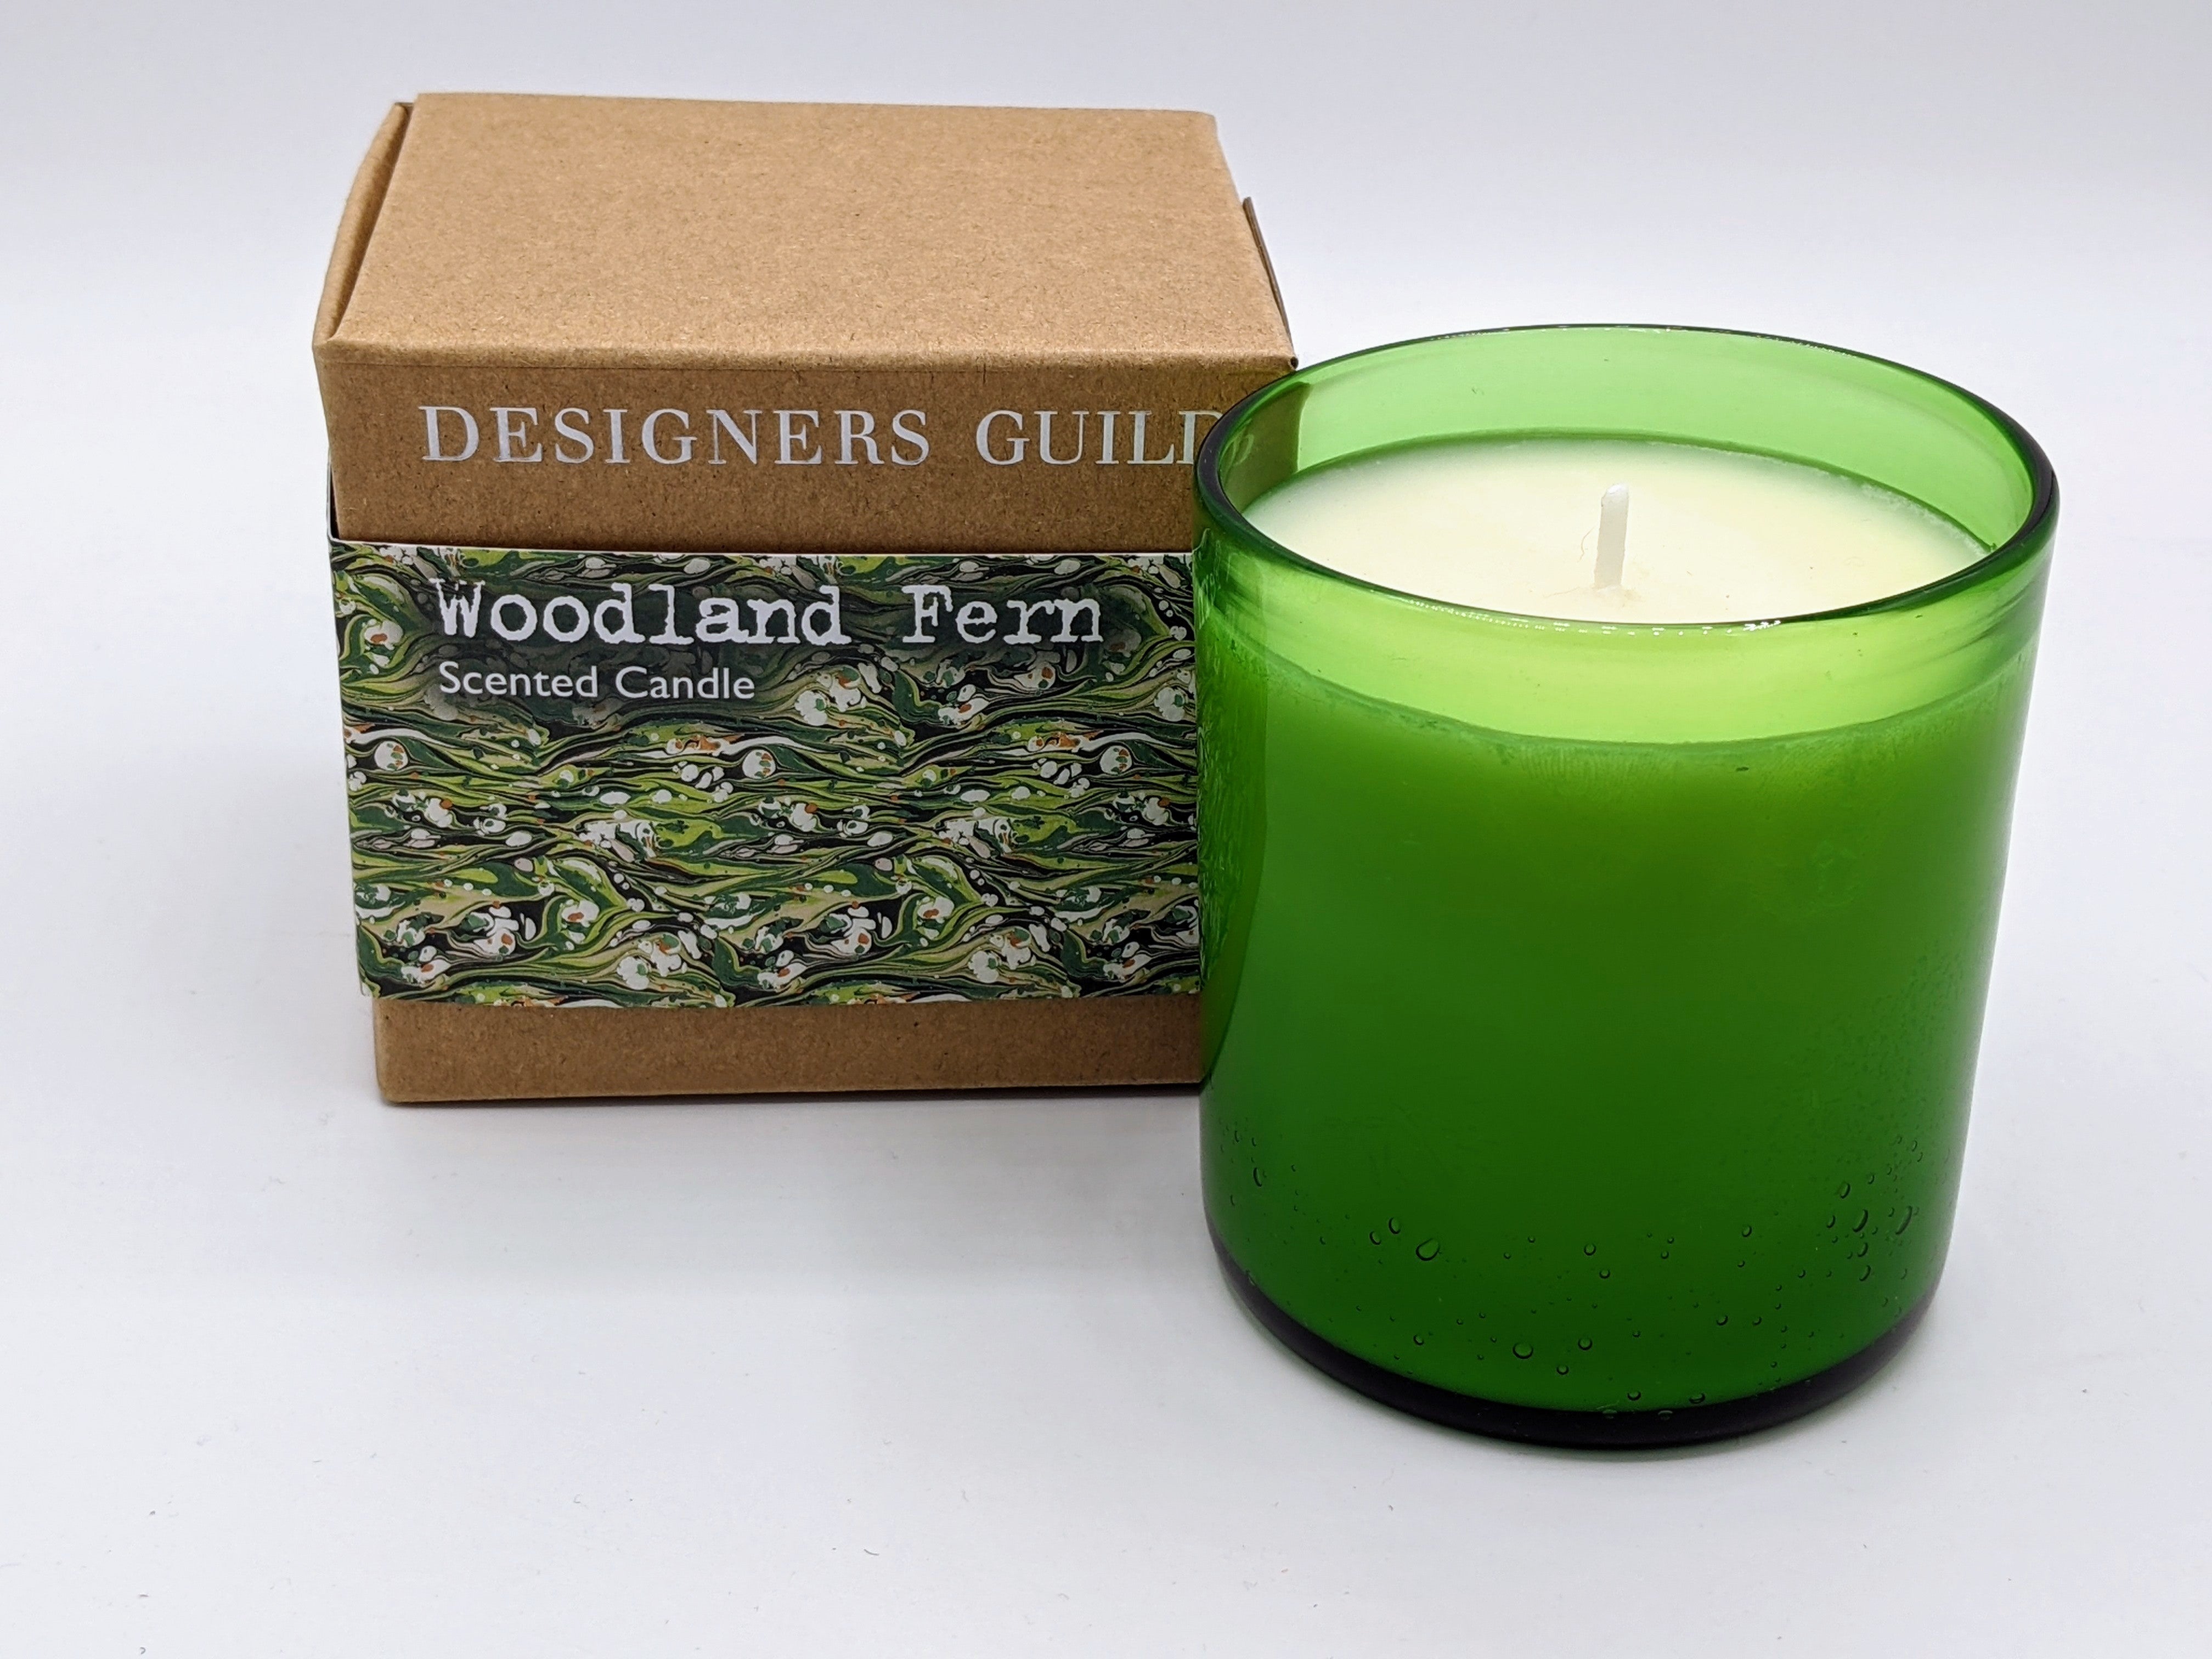 Woodland Fern scented candle